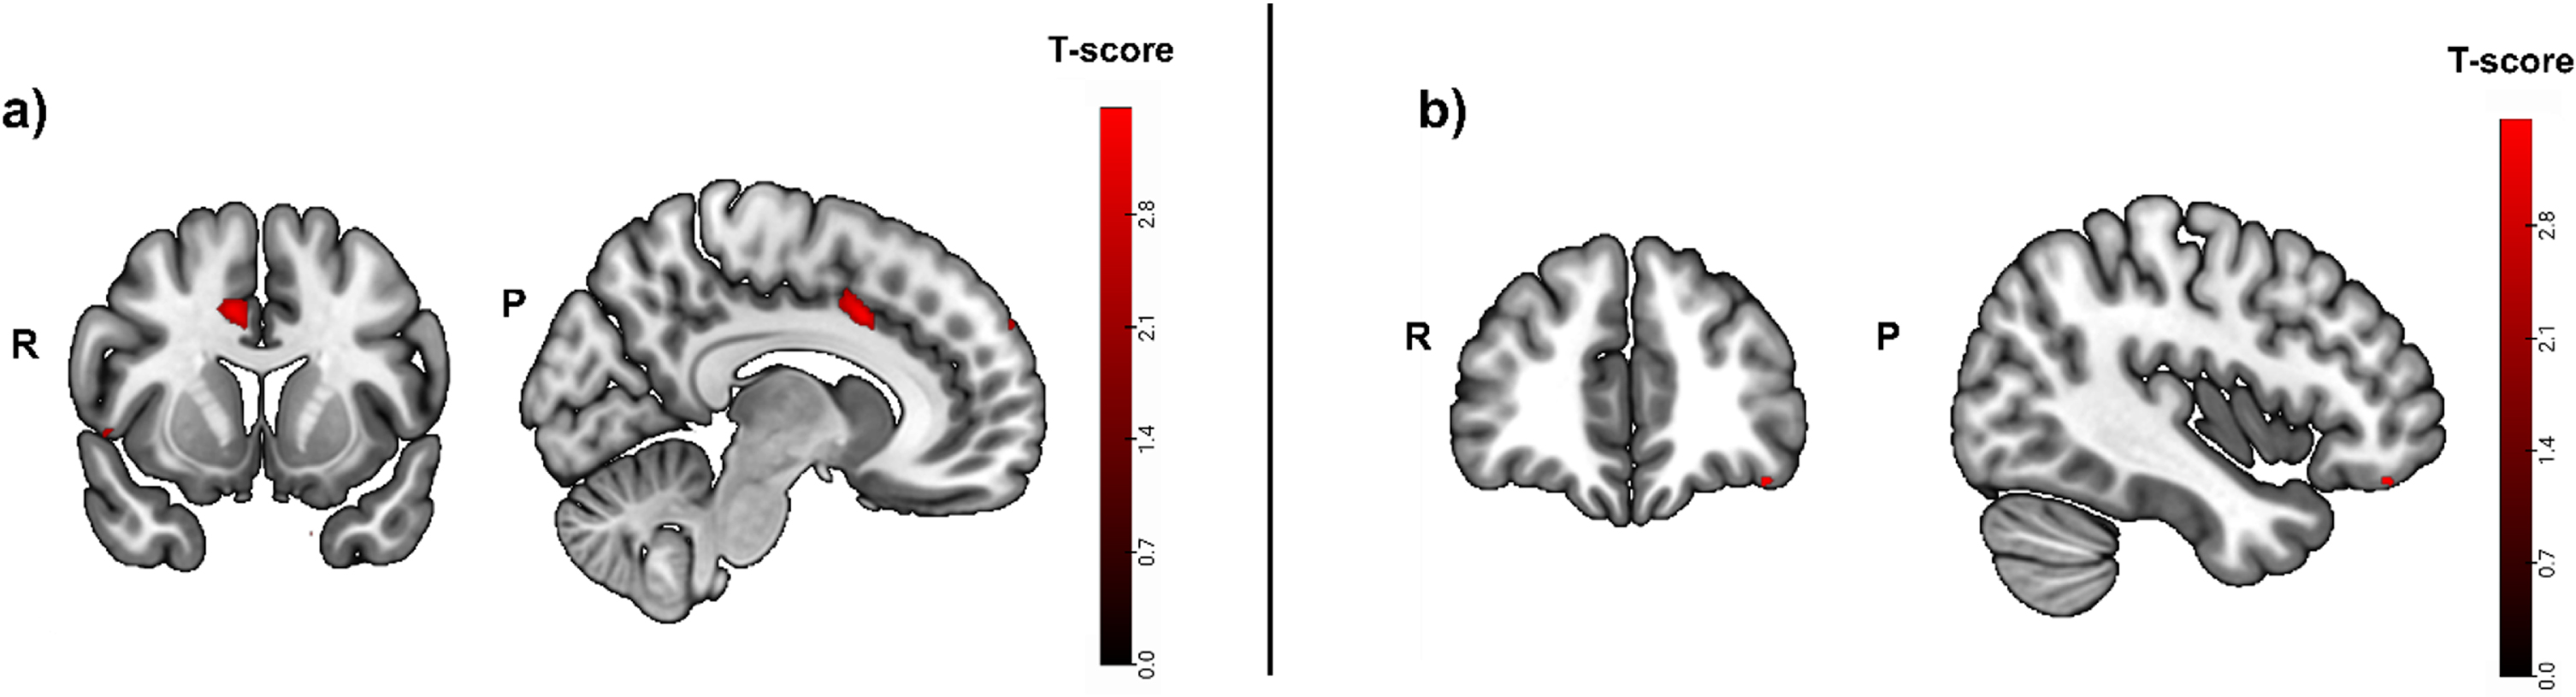 Greater activity related to greater hippocampal atrophy in the episodic memory task (cued recall > control contrast, puncorrected < 0.01), used as mask. Activity was detected in the left temporal pole and the right middle cingulate and occipital fusiform gyrus. b) Greater activity related to high episodic memory task accuracy in the cued recall > control contrast was located in the left lateral orbital gyrus and the left cerebral white matter/occipital fusiform gyrus (puncorrected < 0.001, before masking). R, right; P, posterior.